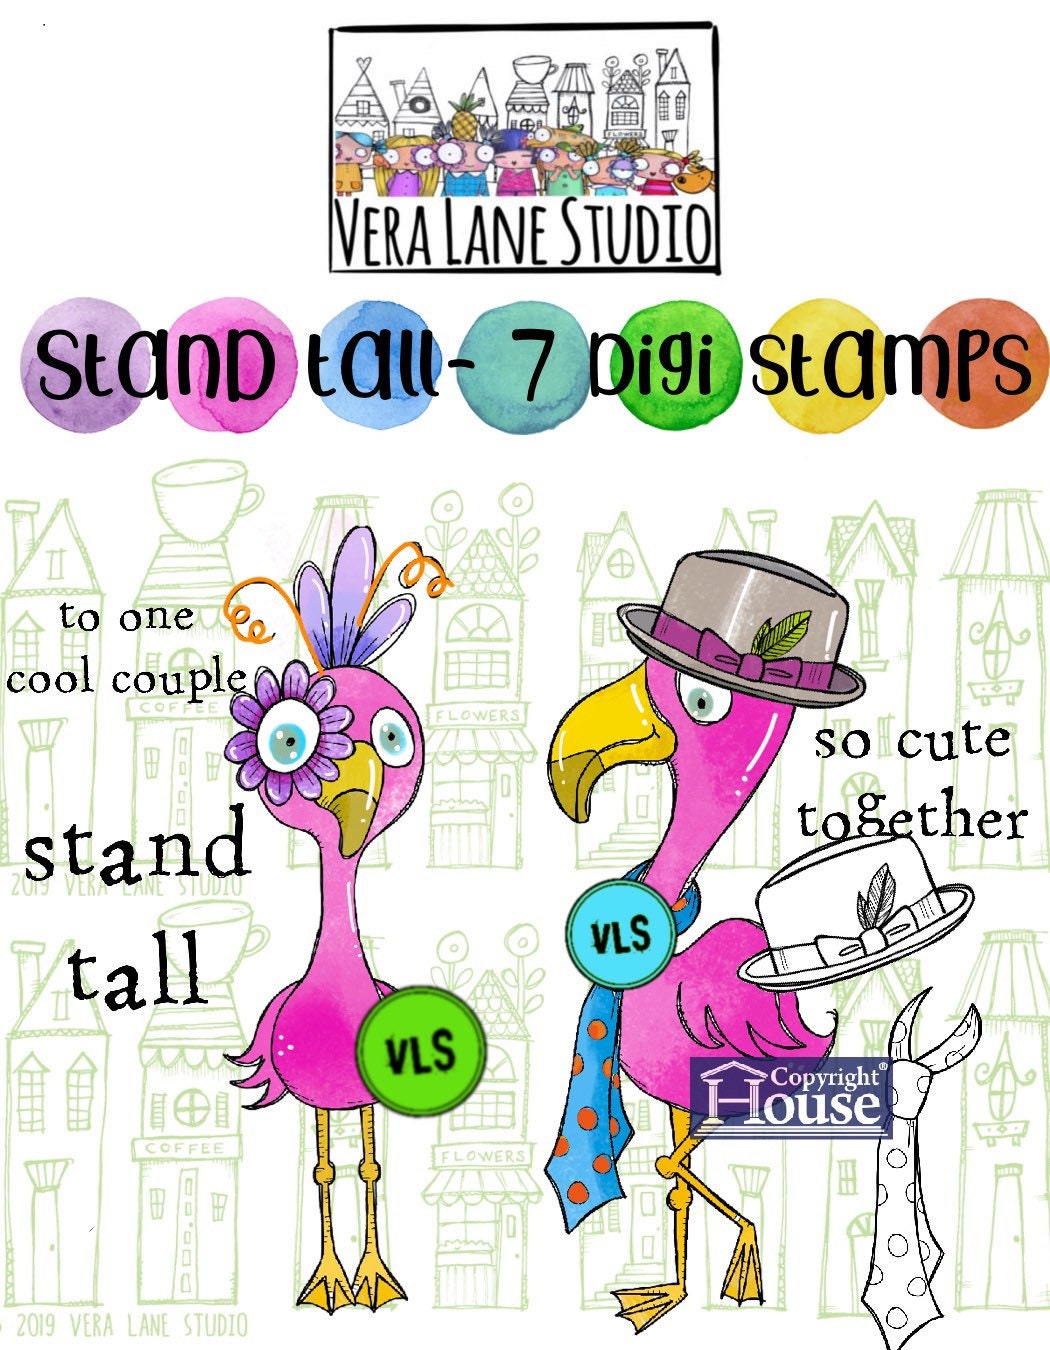 Stand Tall - 7 digi stamps in jpg and png files